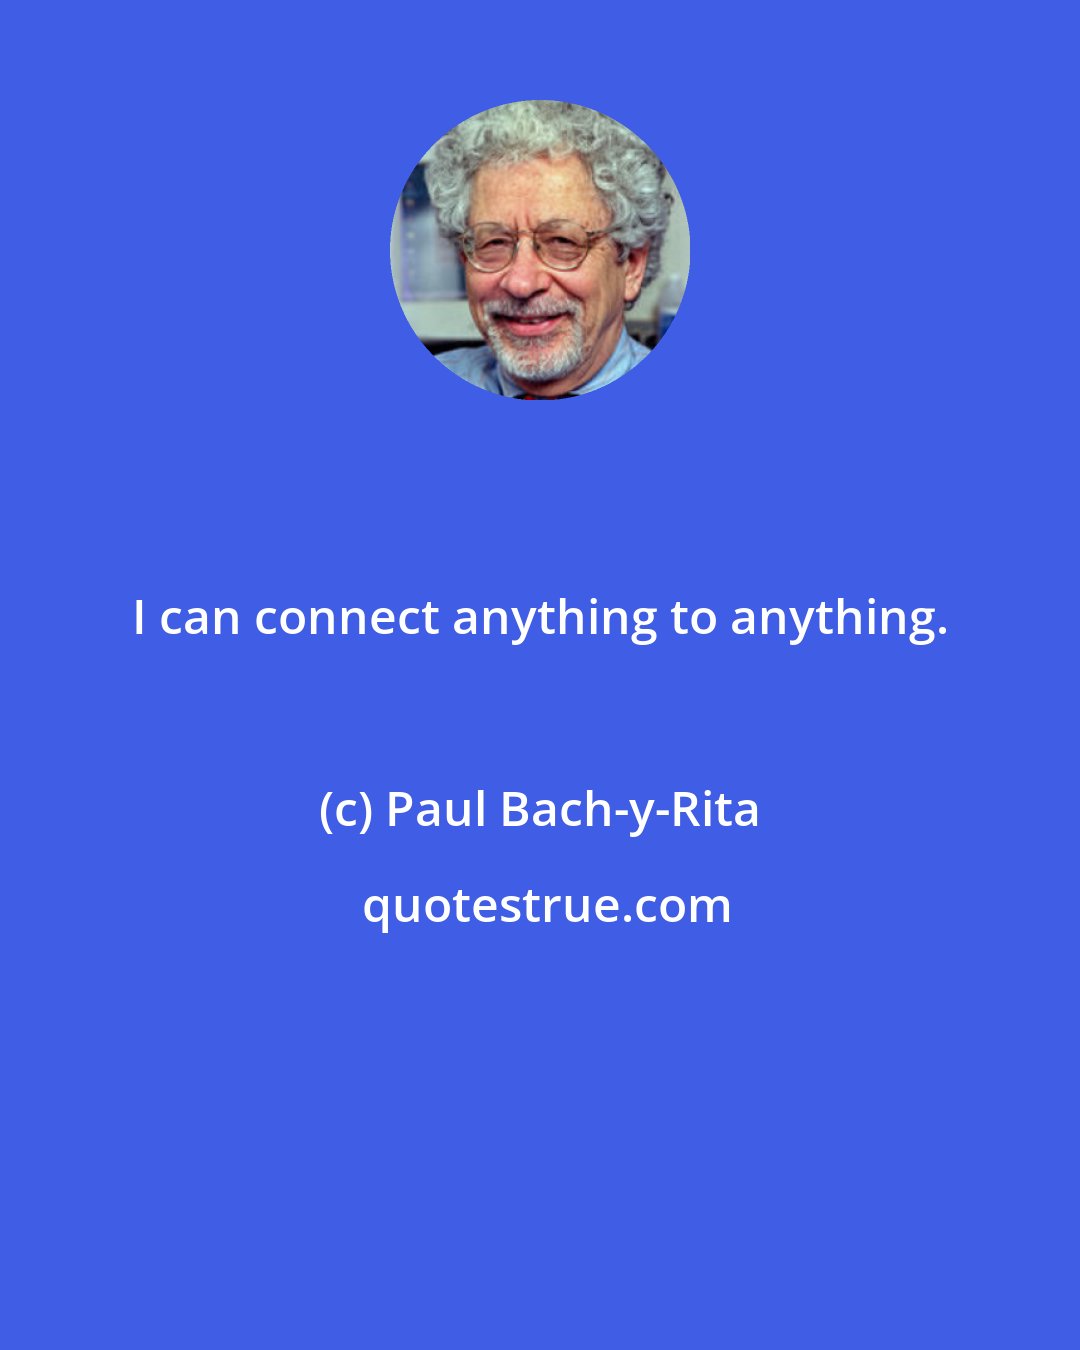 Paul Bach-y-Rita: I can connect anything to anything.